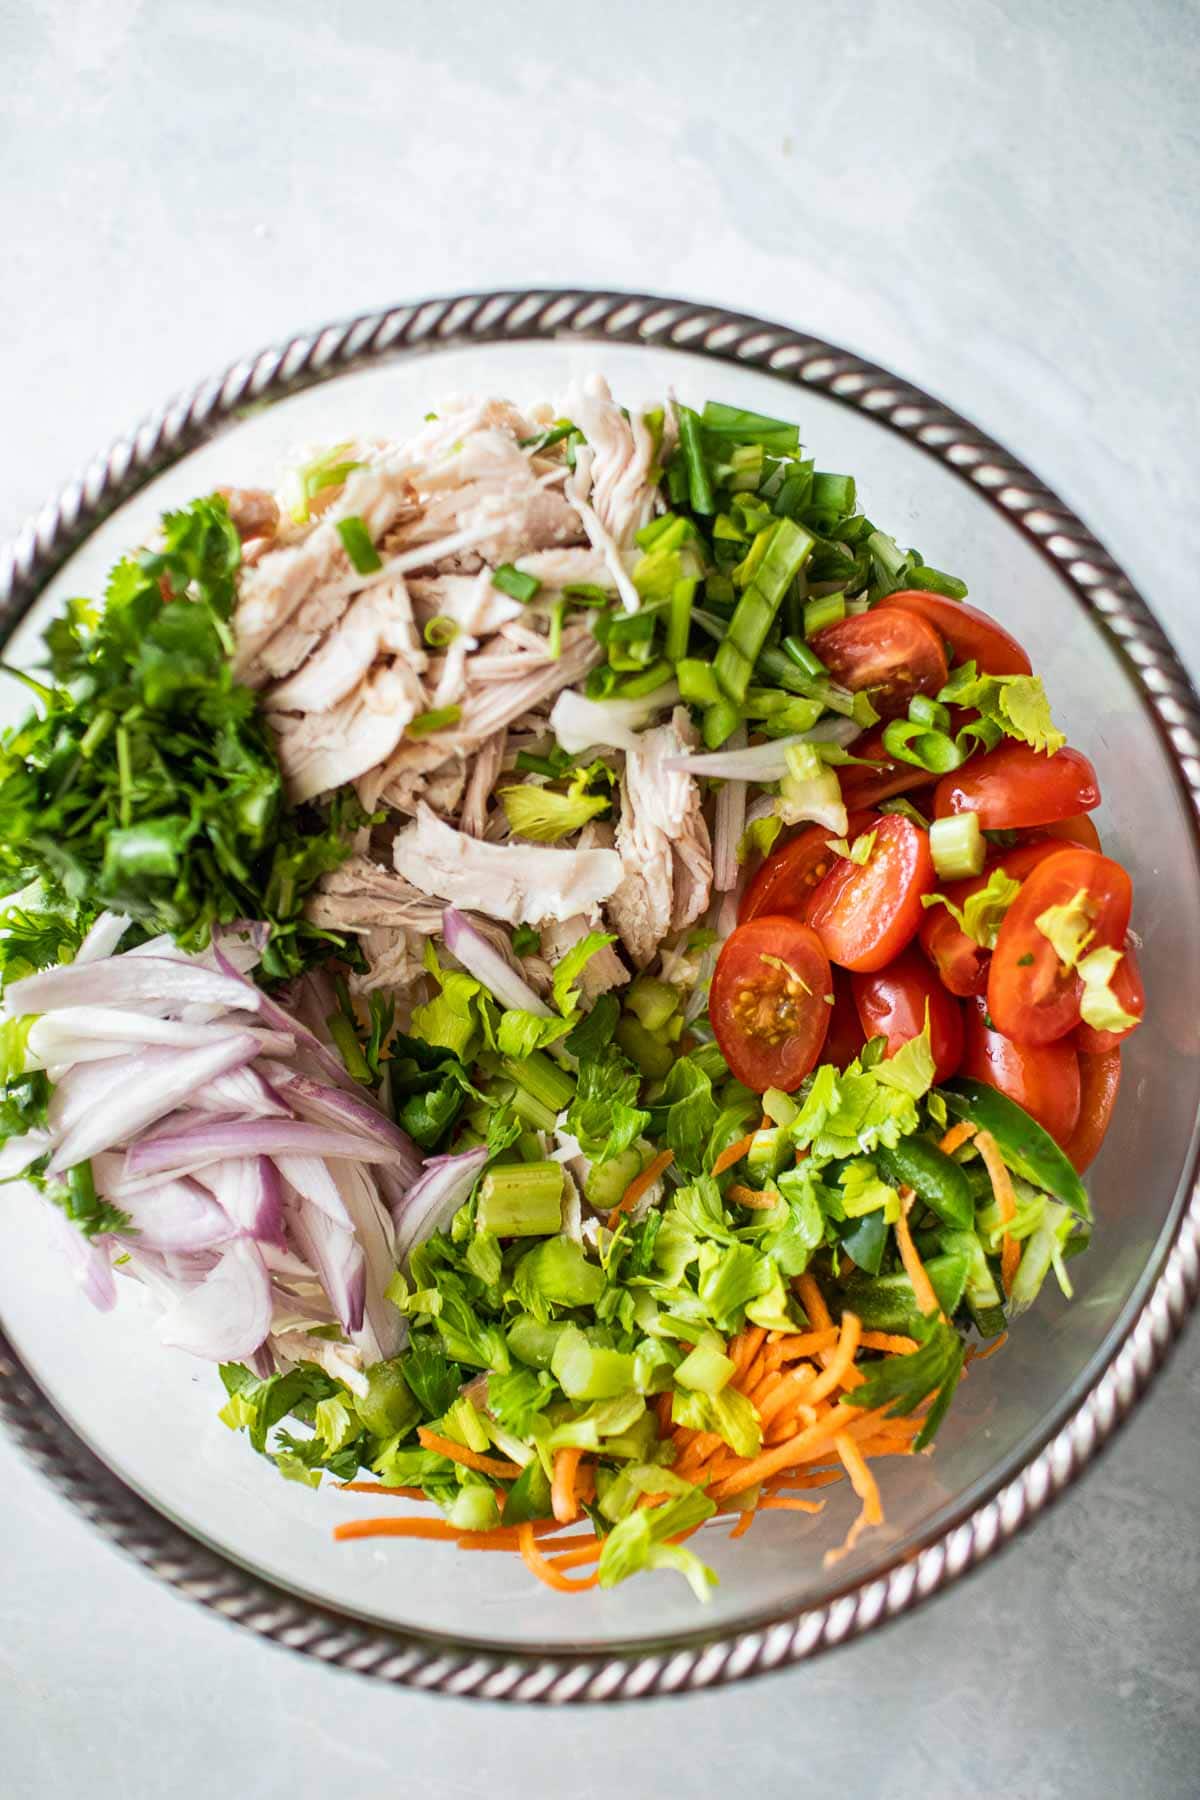 veggies, turkey and herbs in a glass bowl